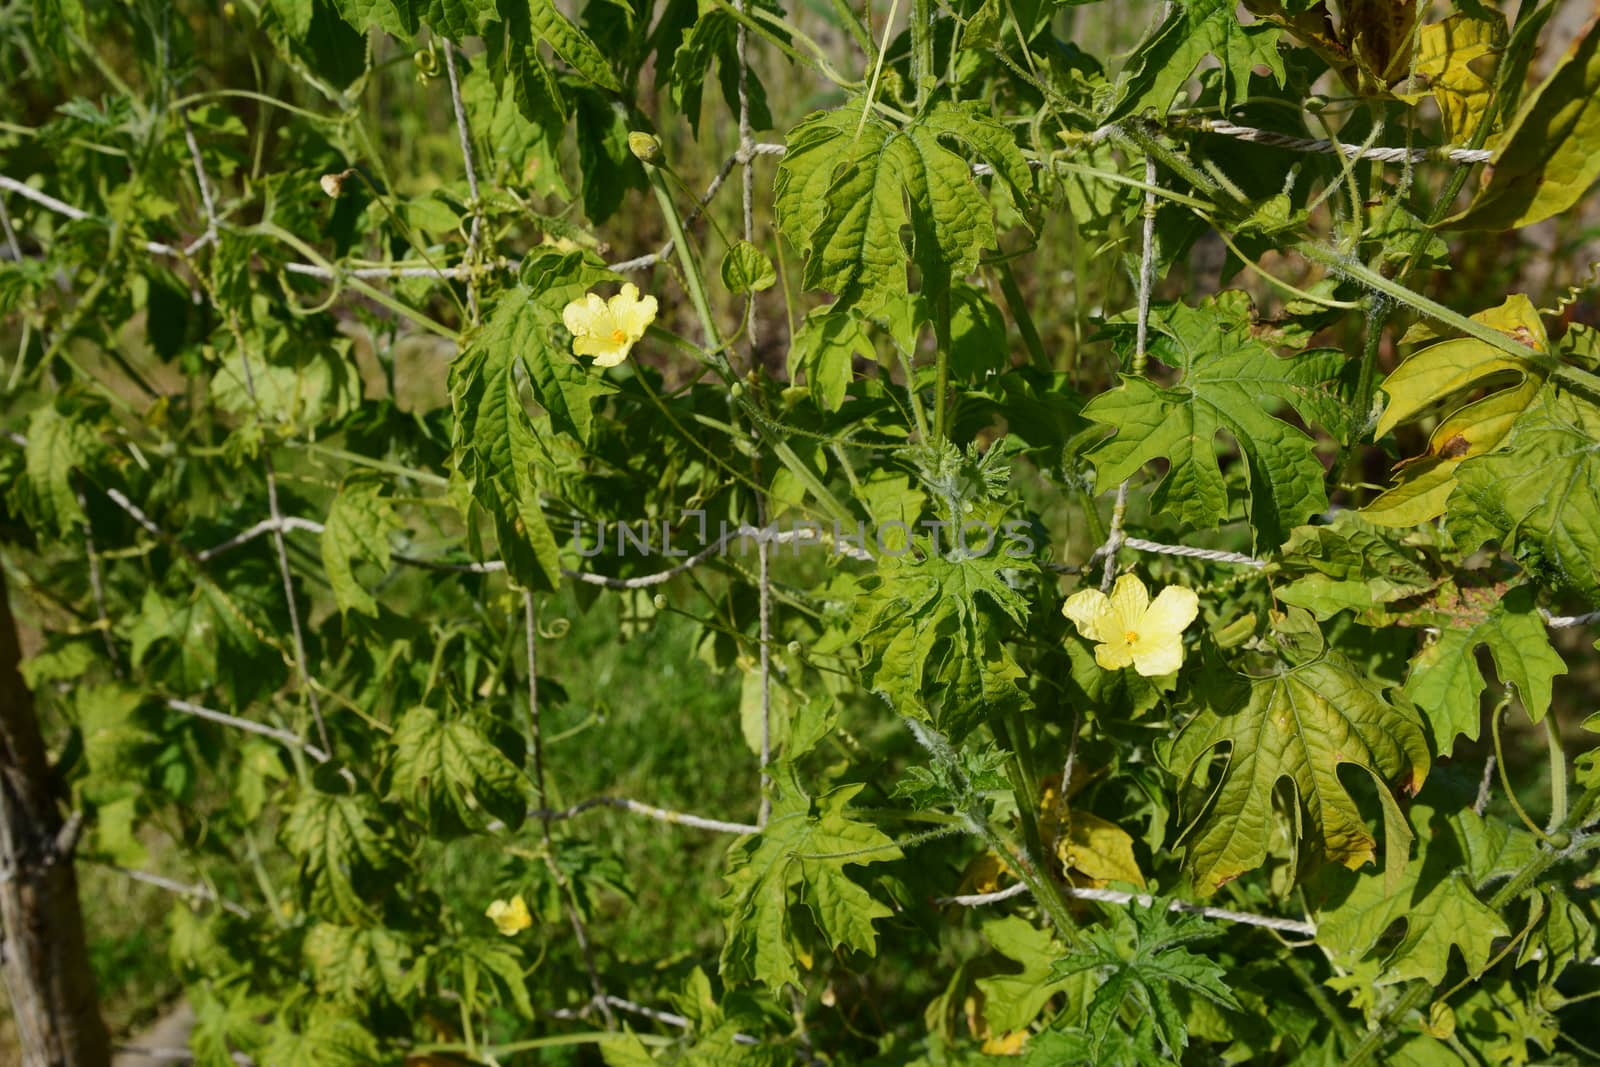 Two delicate male bitter gourd flowers on a lush leafy vine. Small green stamen in the centre of yellow petals.